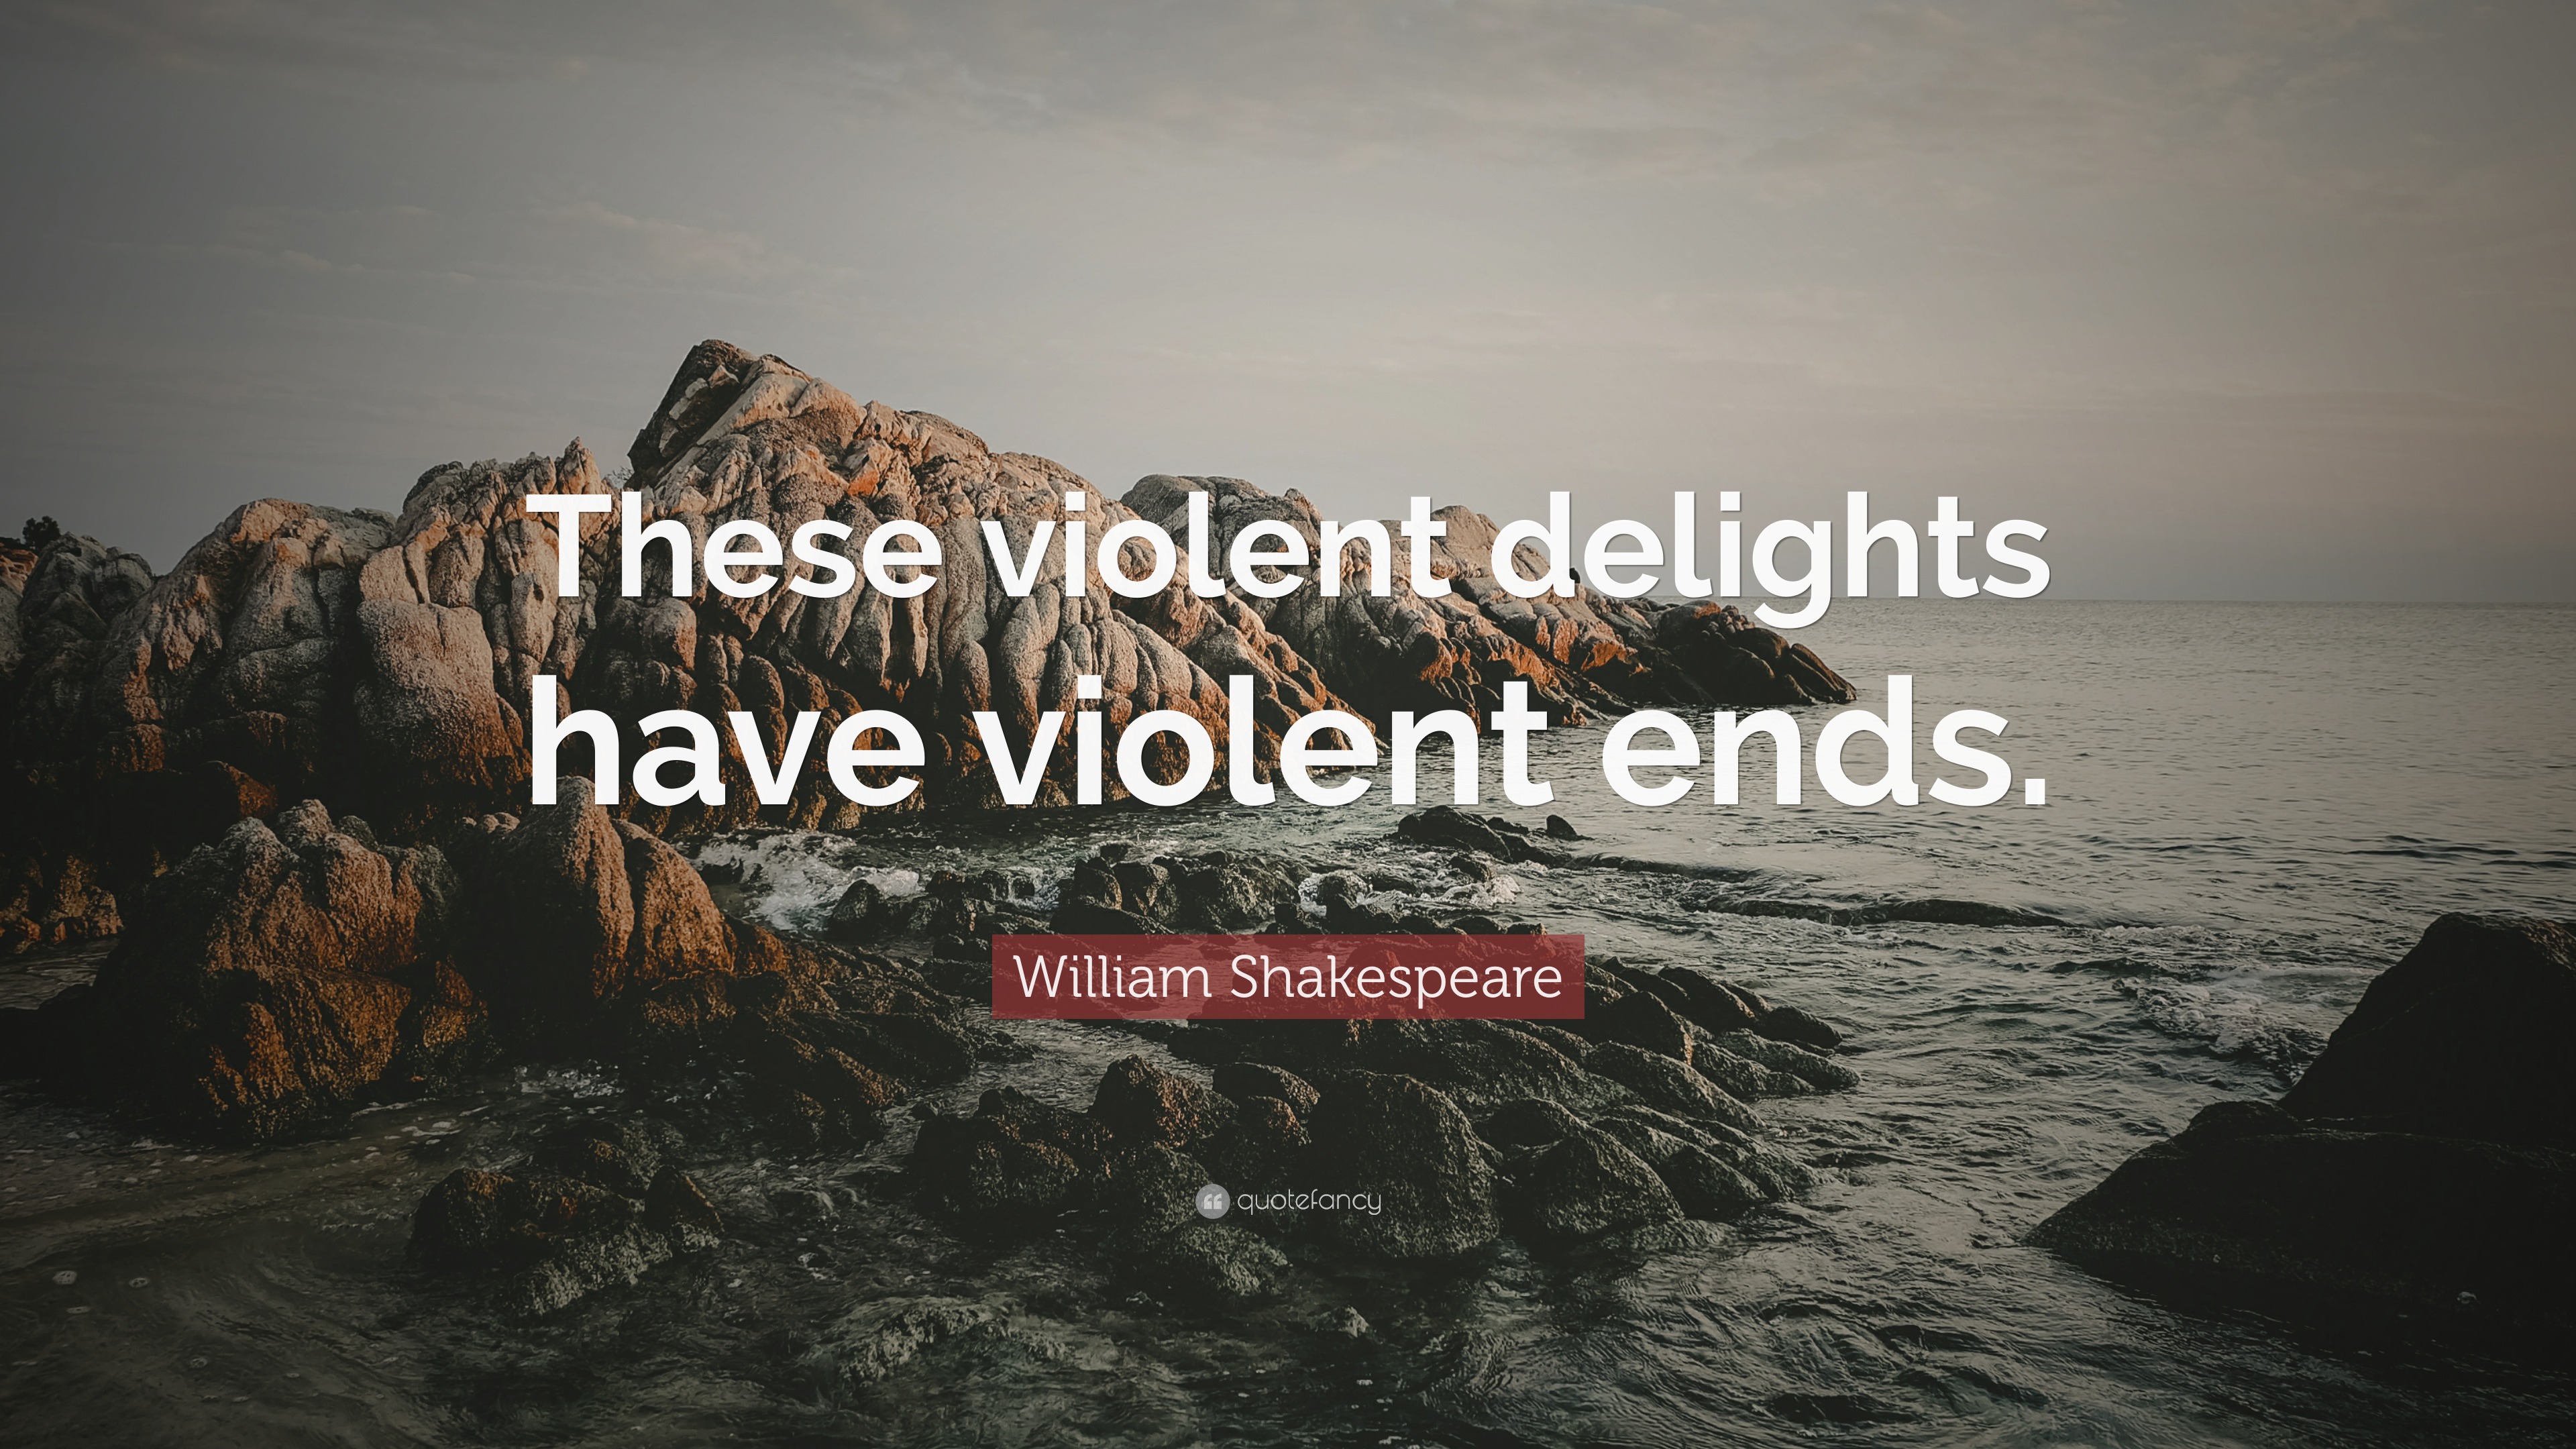 William Shakespeare Quote: “These violent delights have violent ends